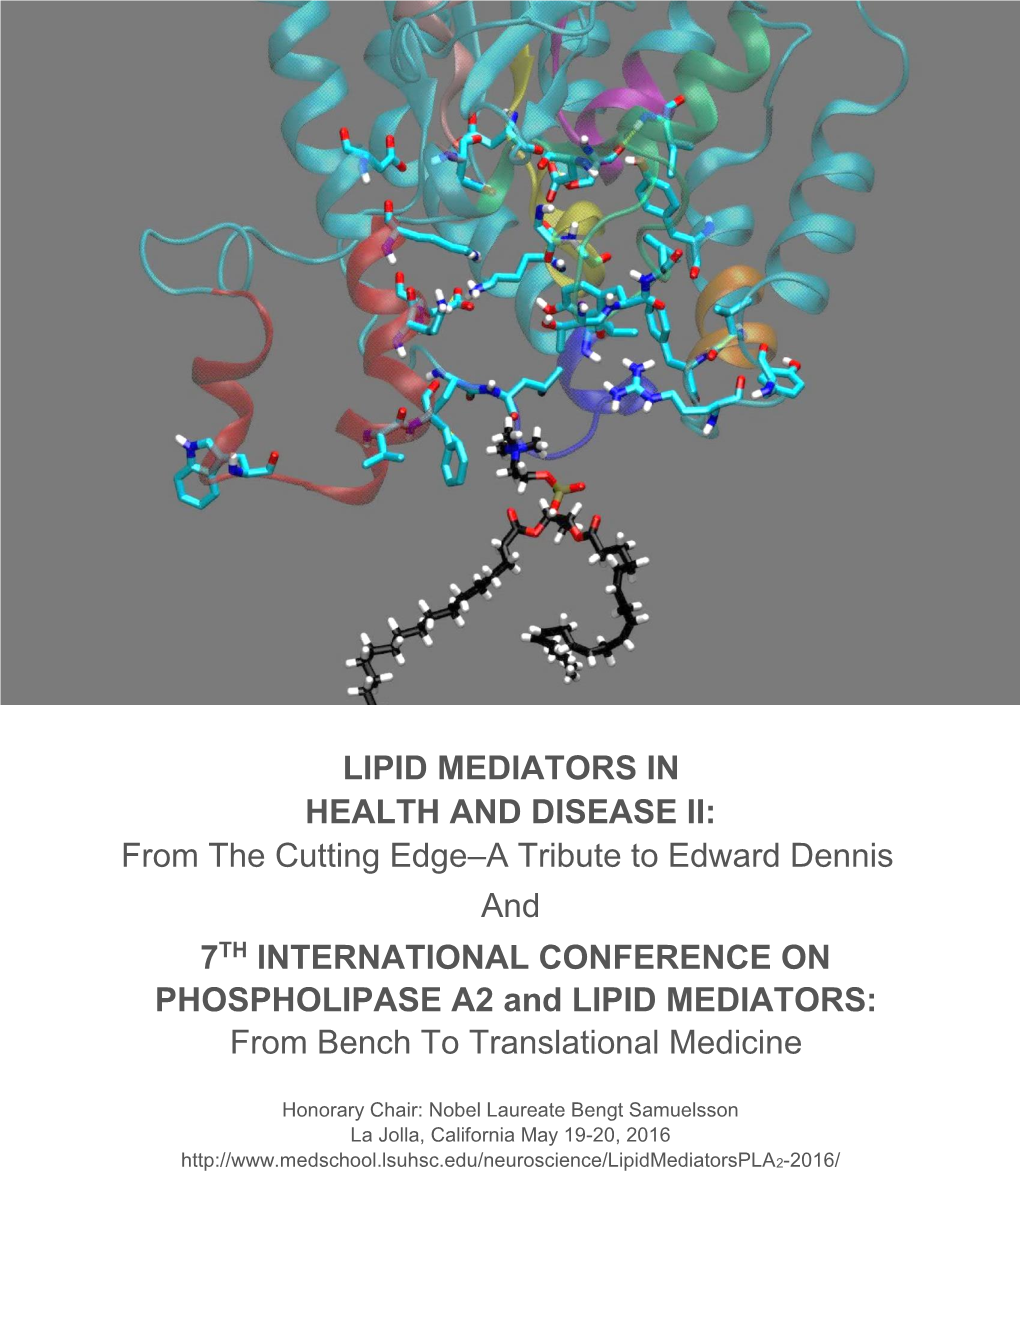 LIPID MEDIATORS in HEALTH and DISEASE II: from the Cutting Edge–A Tribute to Edward Dennis and 7TH INTERNATIONAL CONFERENCE on PHOSPHOLIPASE A2 and LIPID MEDIATORS